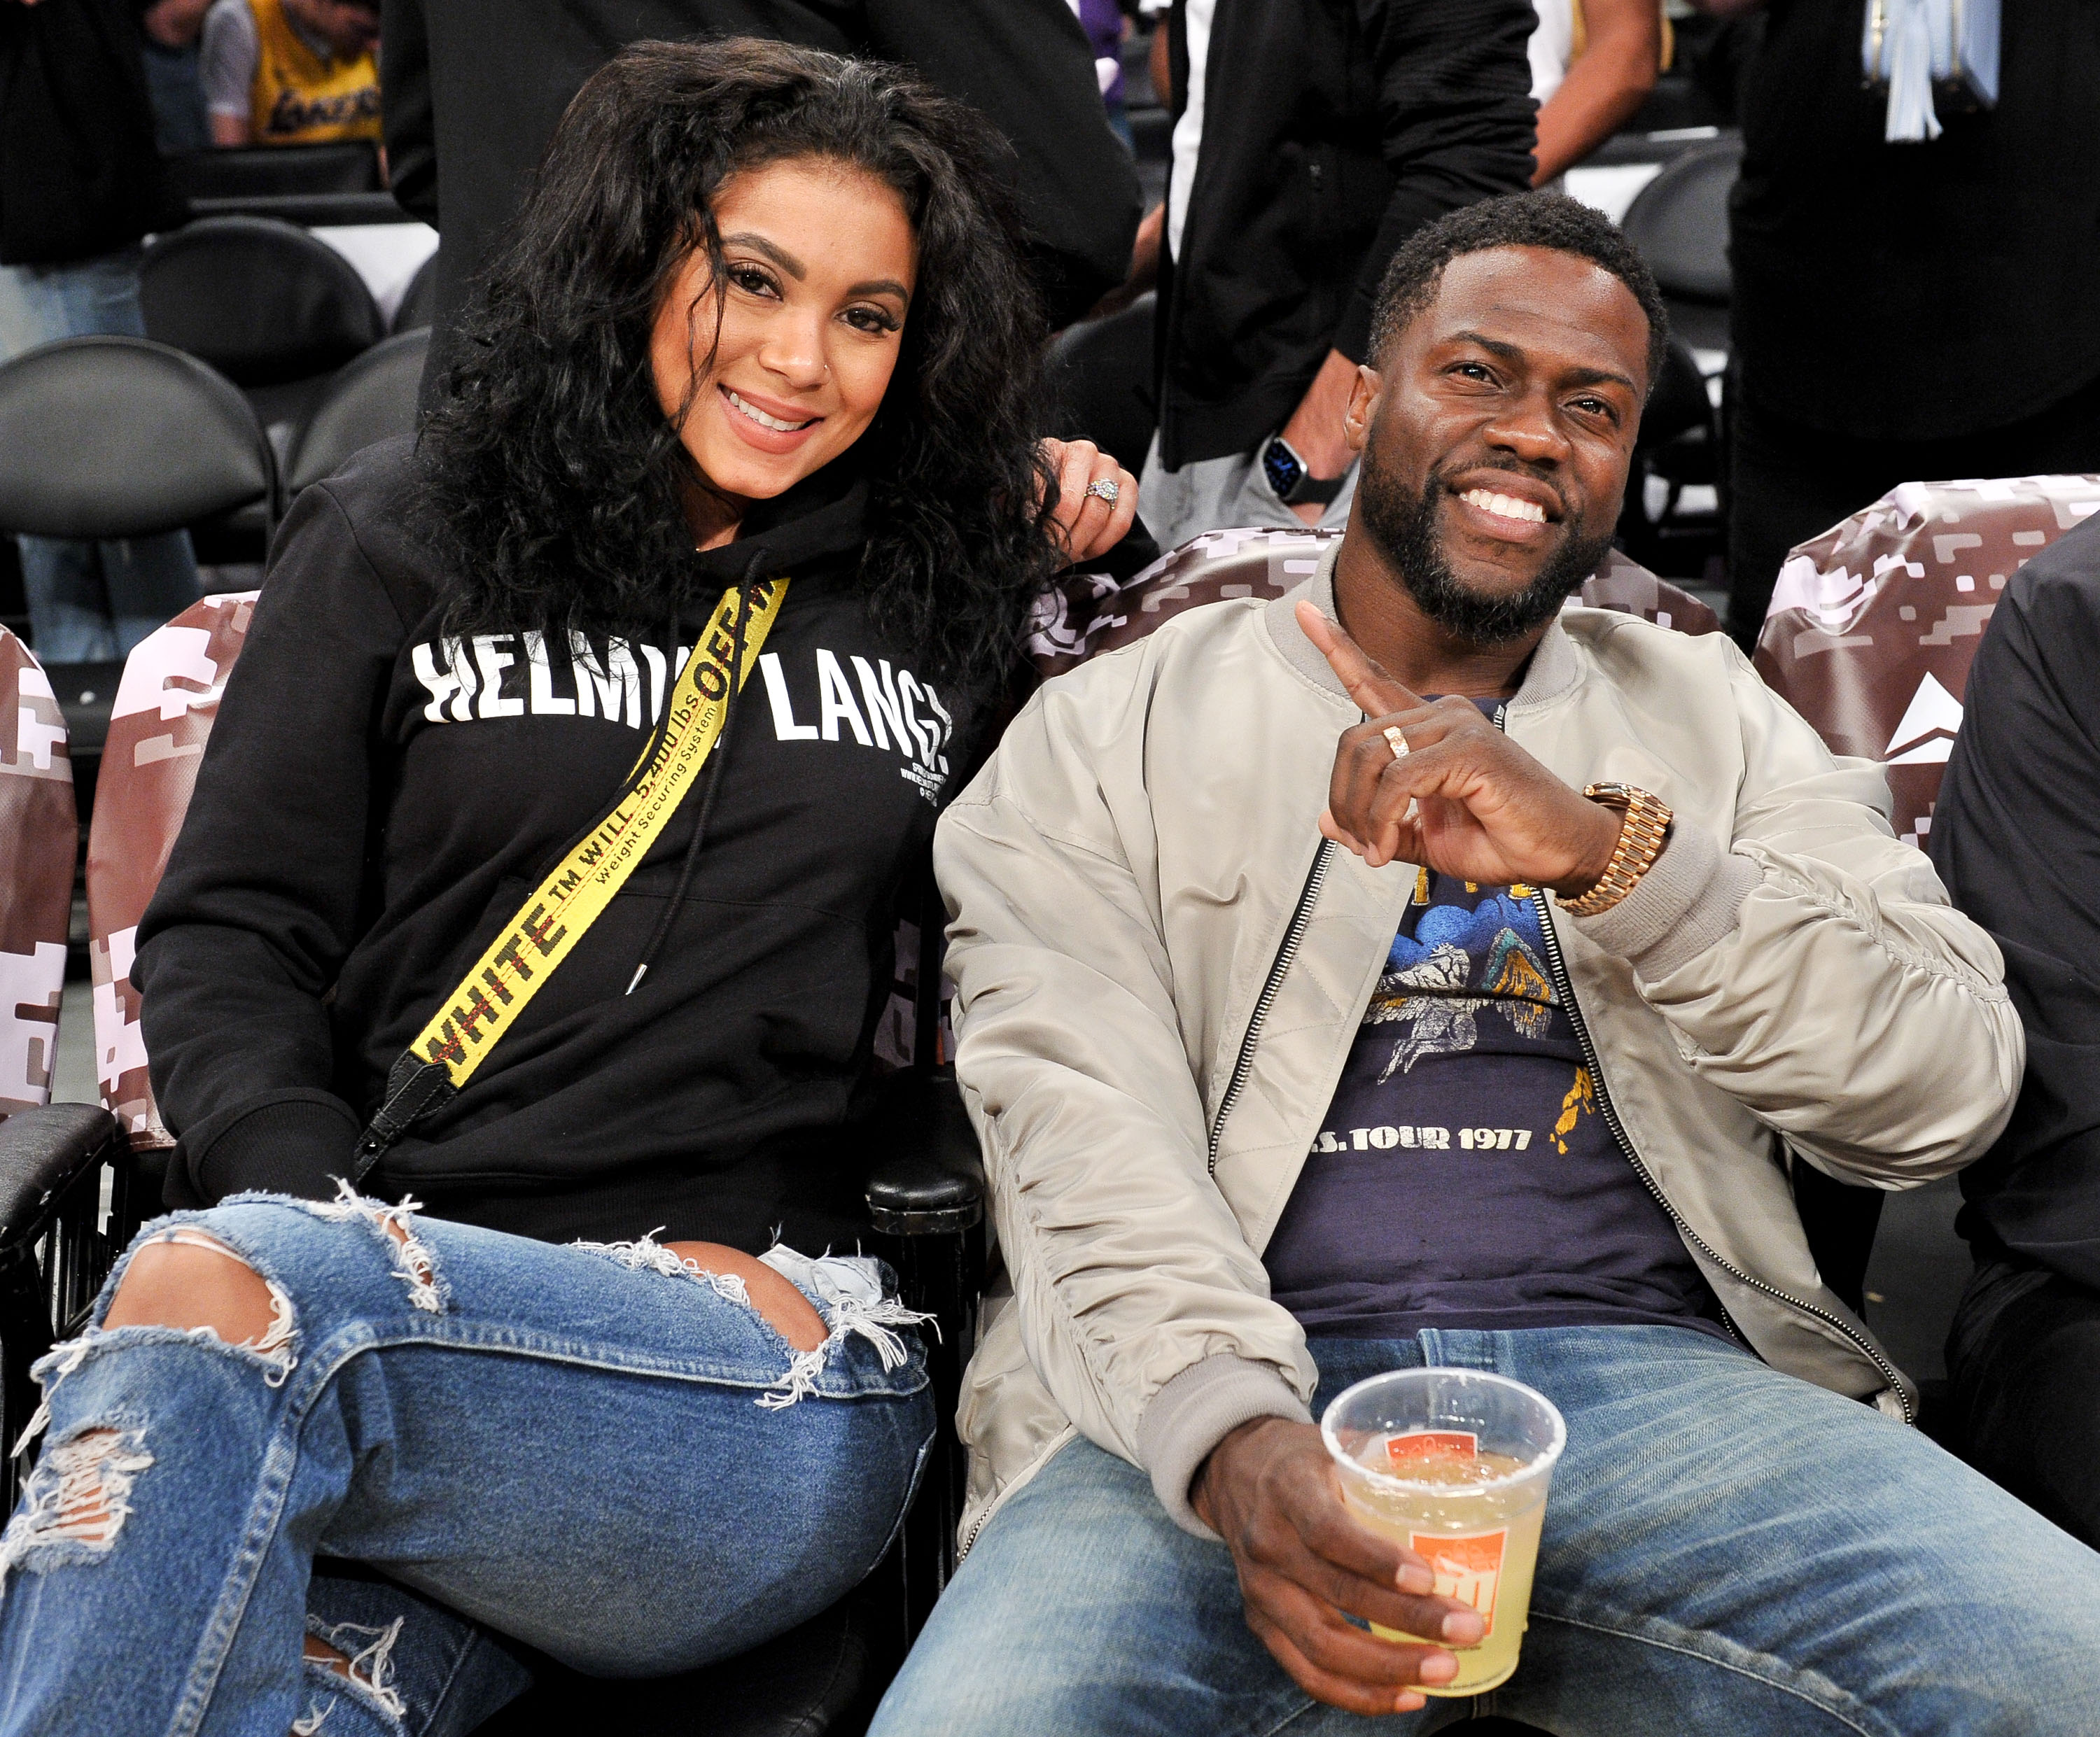 Kevin Hart and Eniko Parrish attend a basketball game at Staples Center on November 17, 2019 in Los Angeles, California. | Source: Getty Images